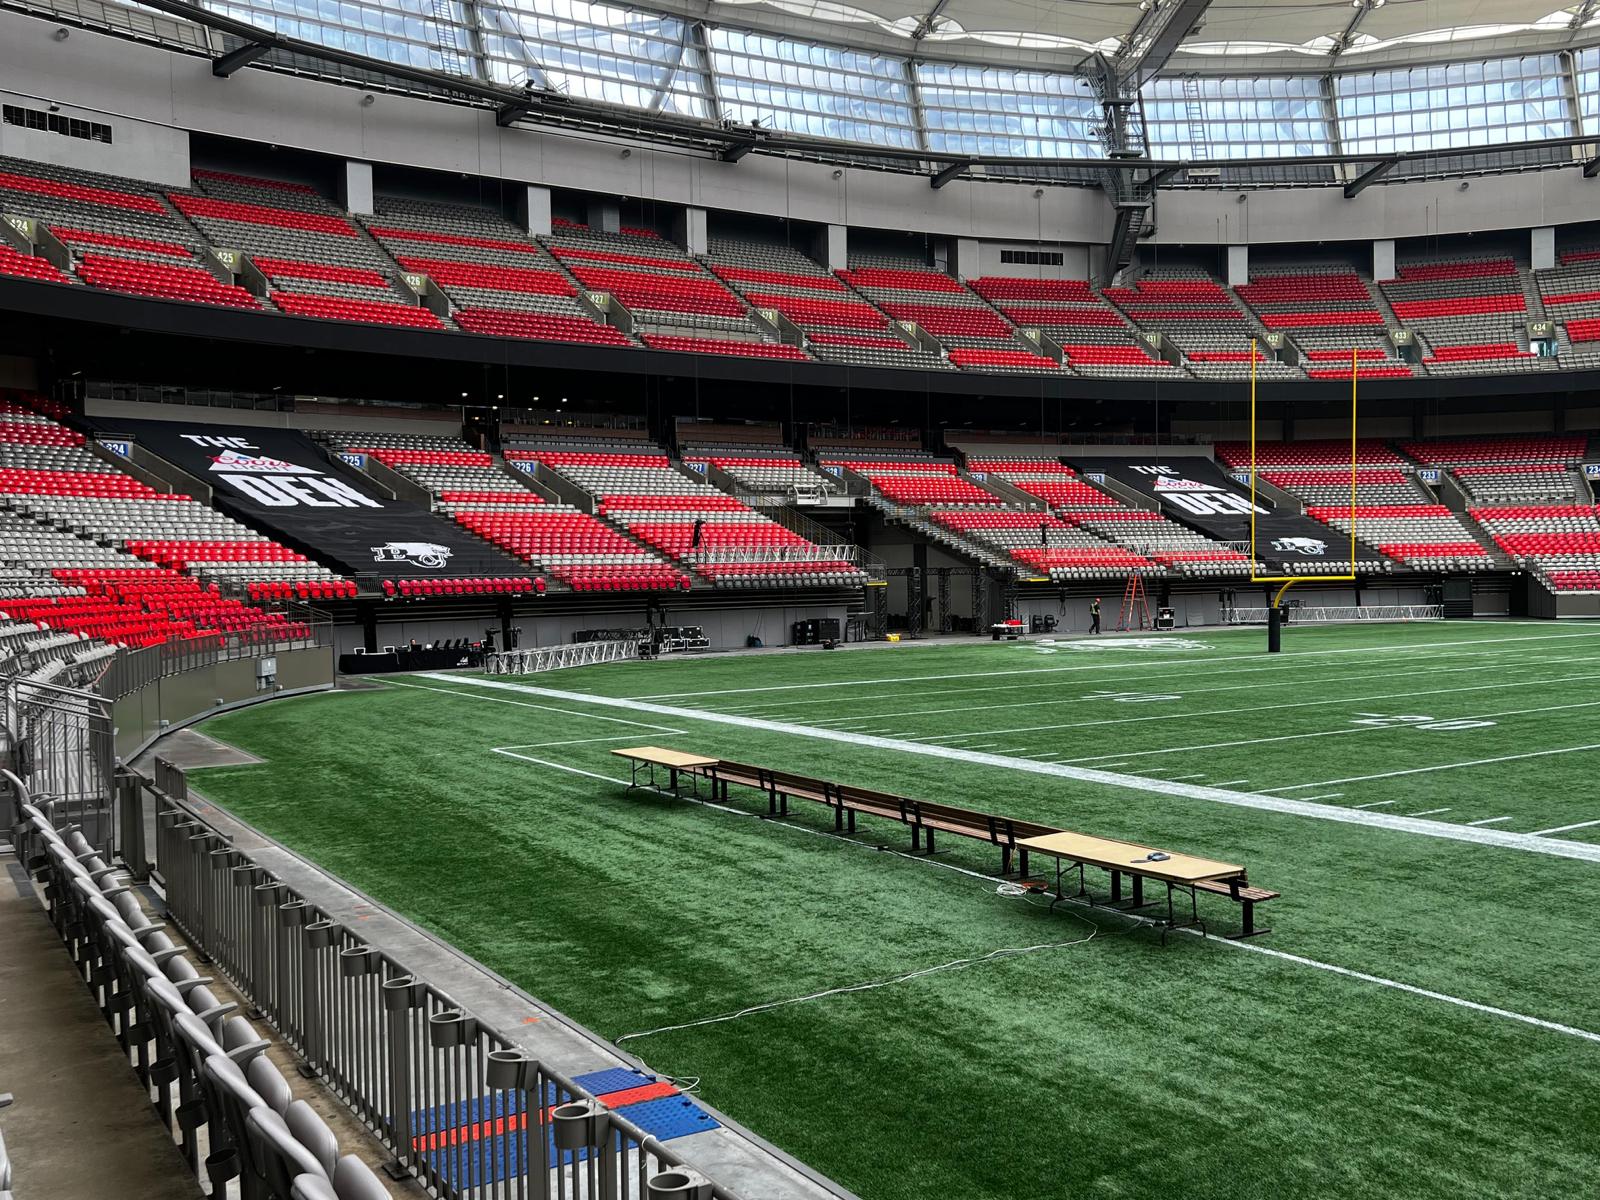 The Den fabric covering banners for the BC Lions home opener game!